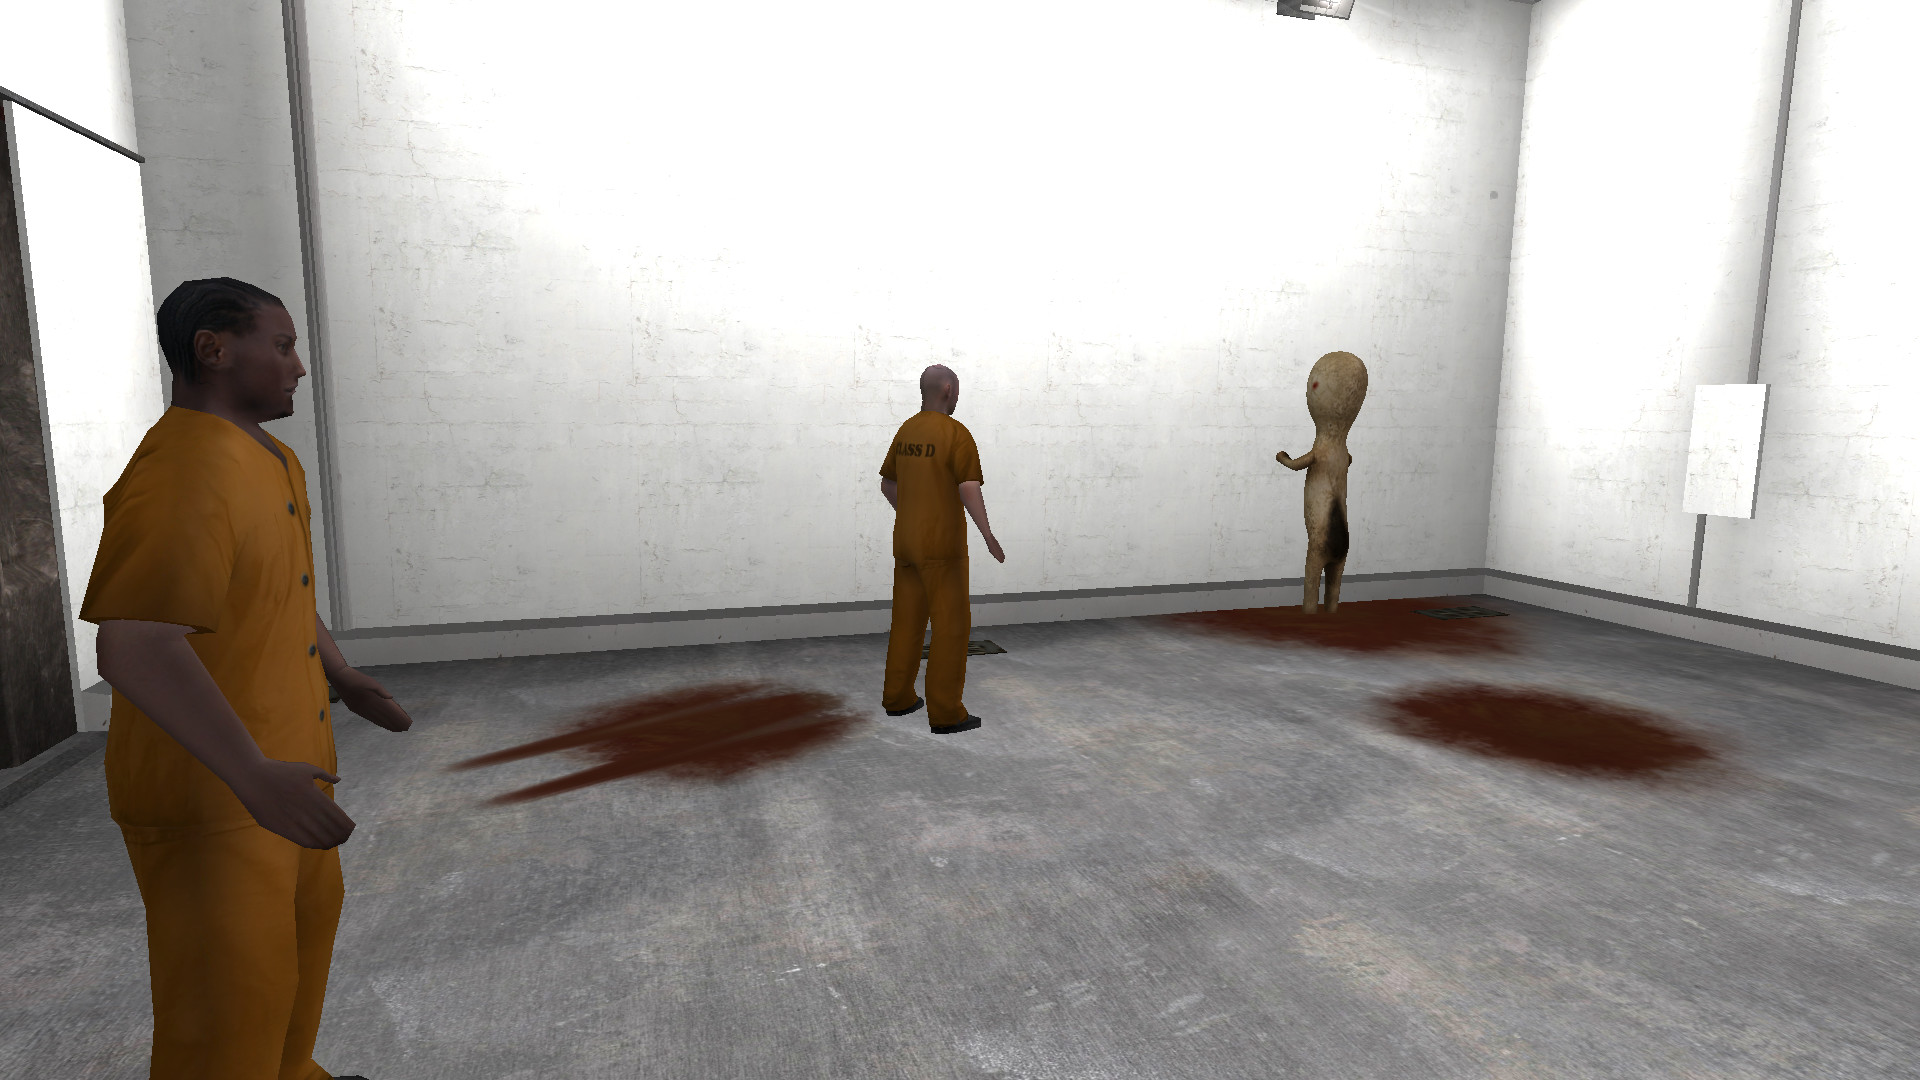 SCP - Containment Breach The game is based on the works of the SCP